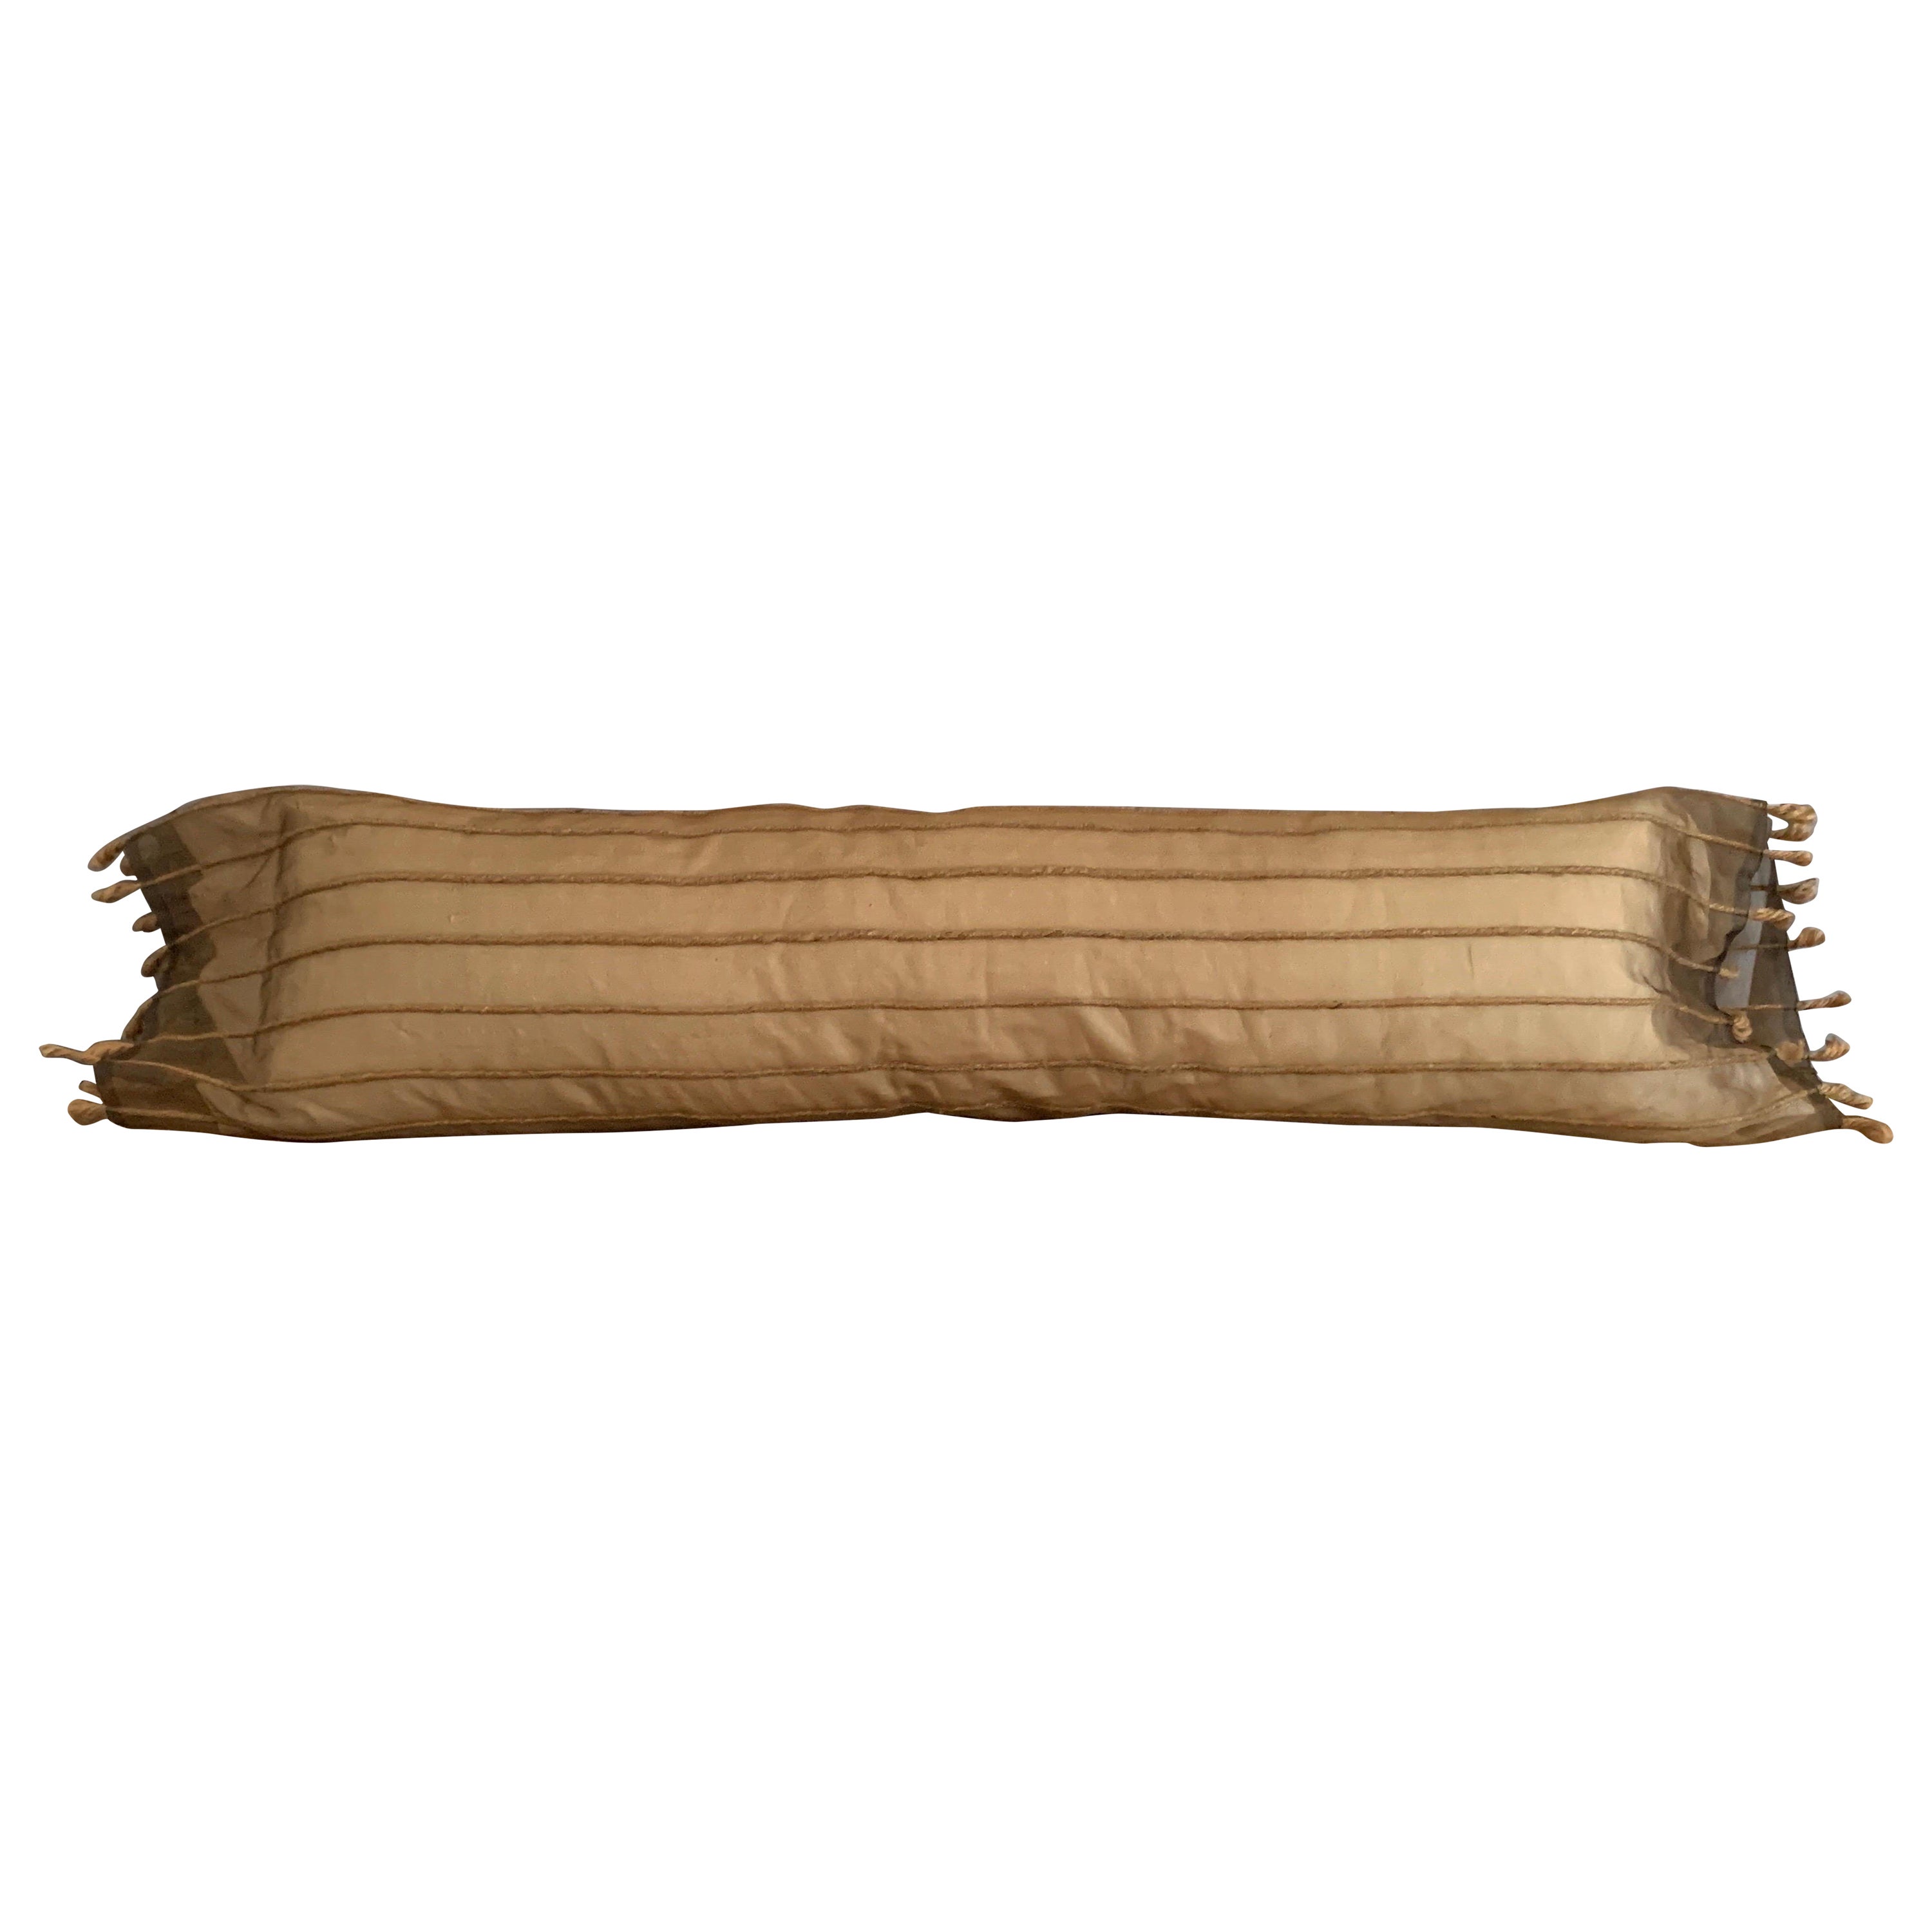 Embroidered Raw Silk and Organza Long Body Roll Pillow from Luxe Bedding Set For Sale